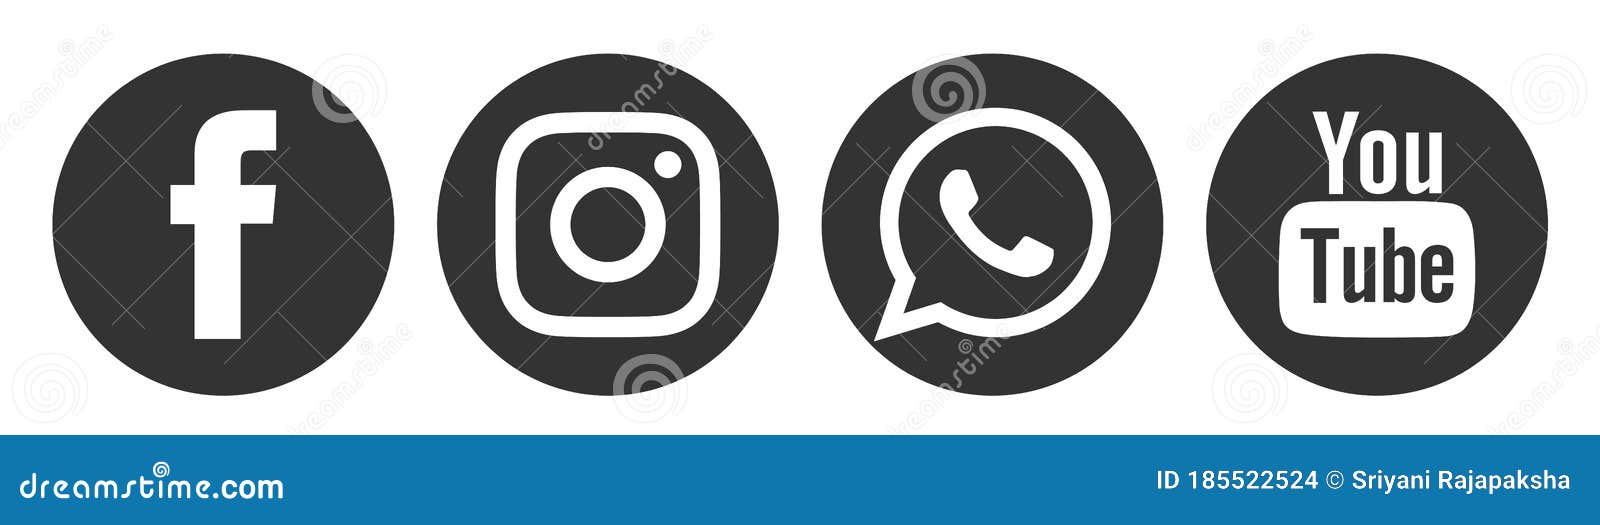 Facebook Instagram Whatsapp Youtube Social Media Logo Icon In Black Vector Isolated On White Background Editorial Stock Image Illustration Of Icon Button